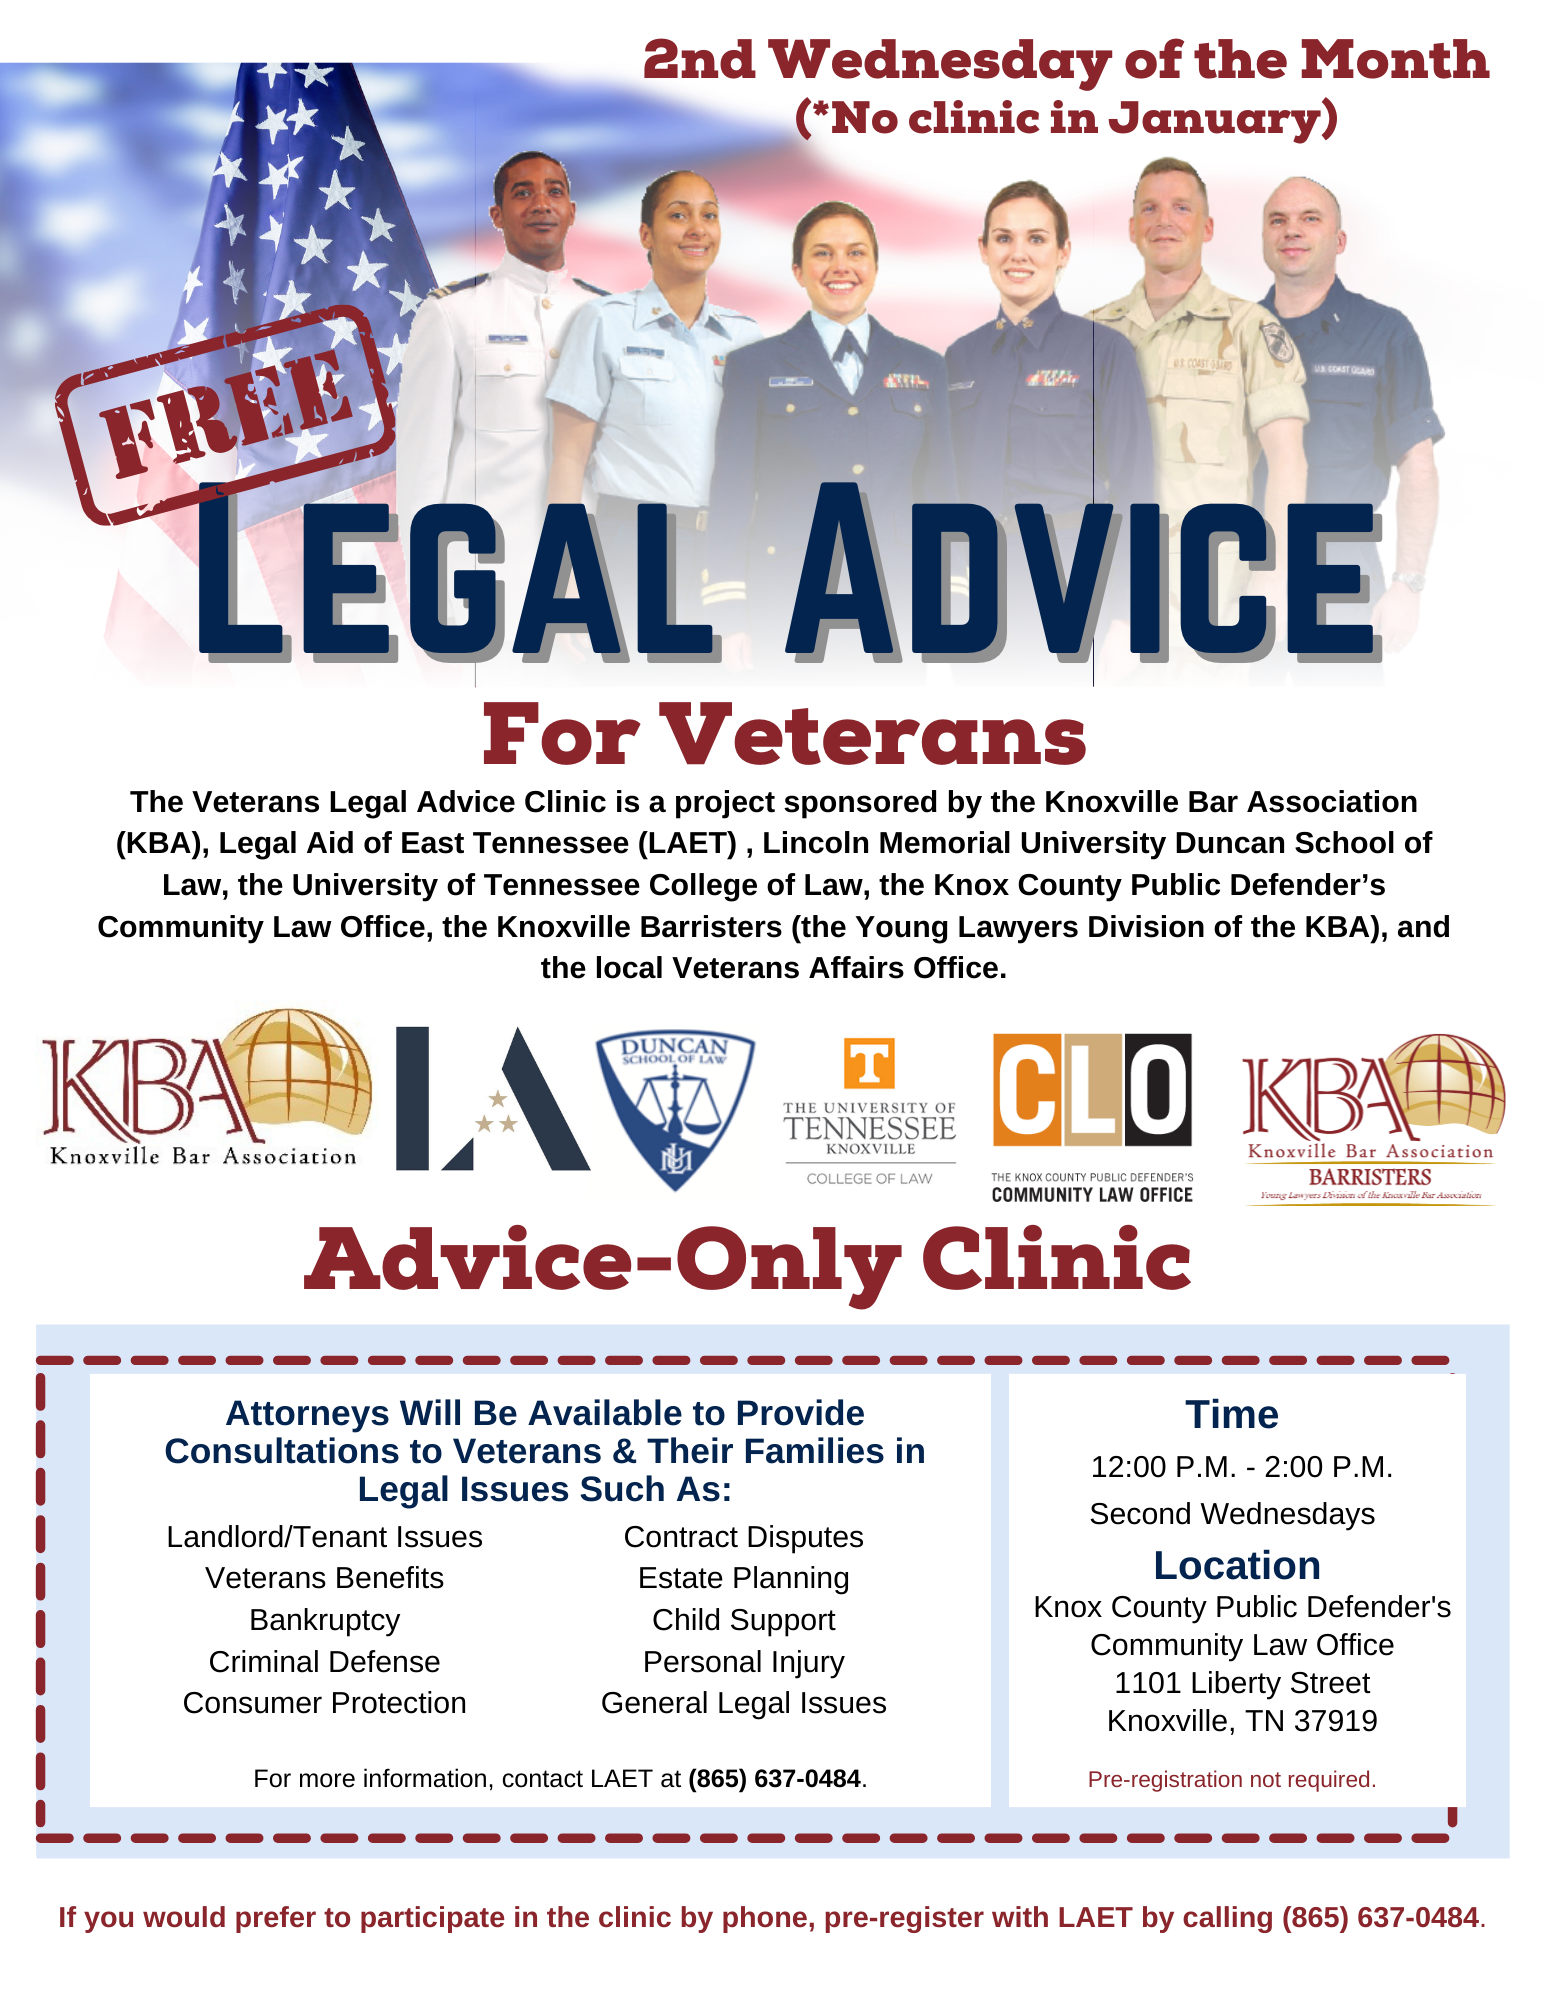 Flyer sharing same information as in blog post regarding February 14, 2024 Legal Advice Clinic for Veterans from noon to 2pm at the Community Law Office in Knoxville, TN